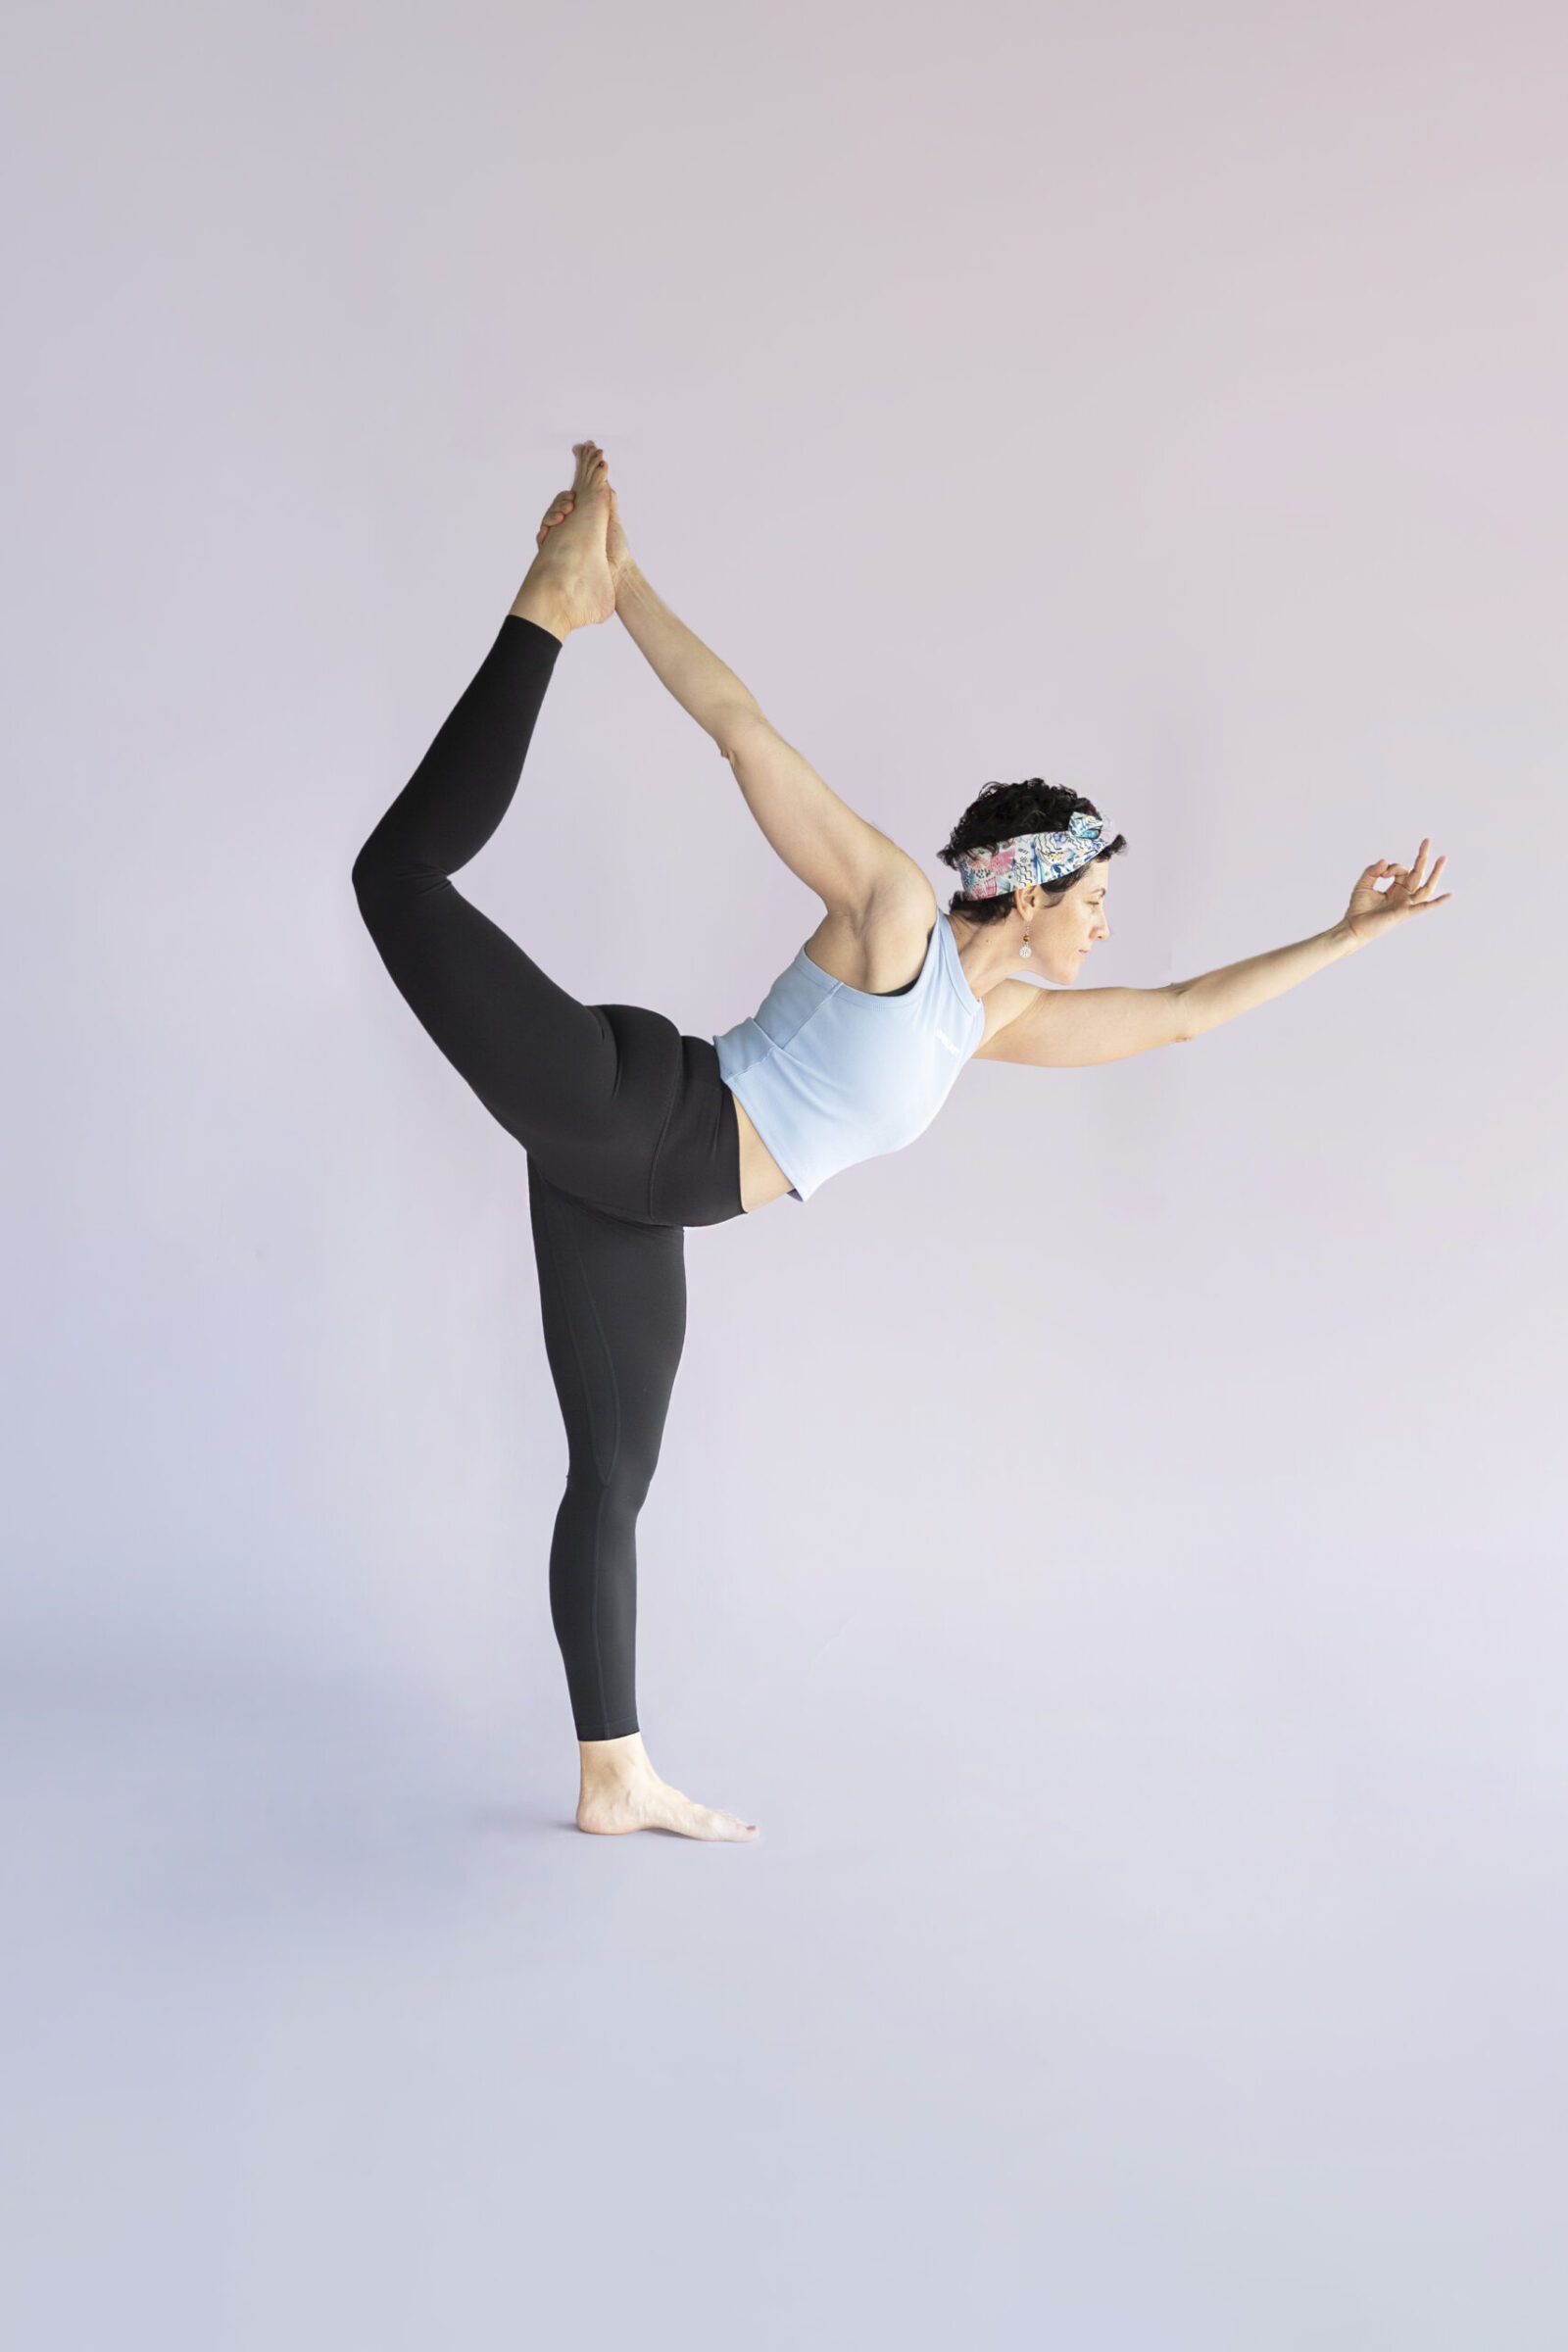 Yoga Poses - What to expect in a Yoga Class | Sivananda Yoga Farm